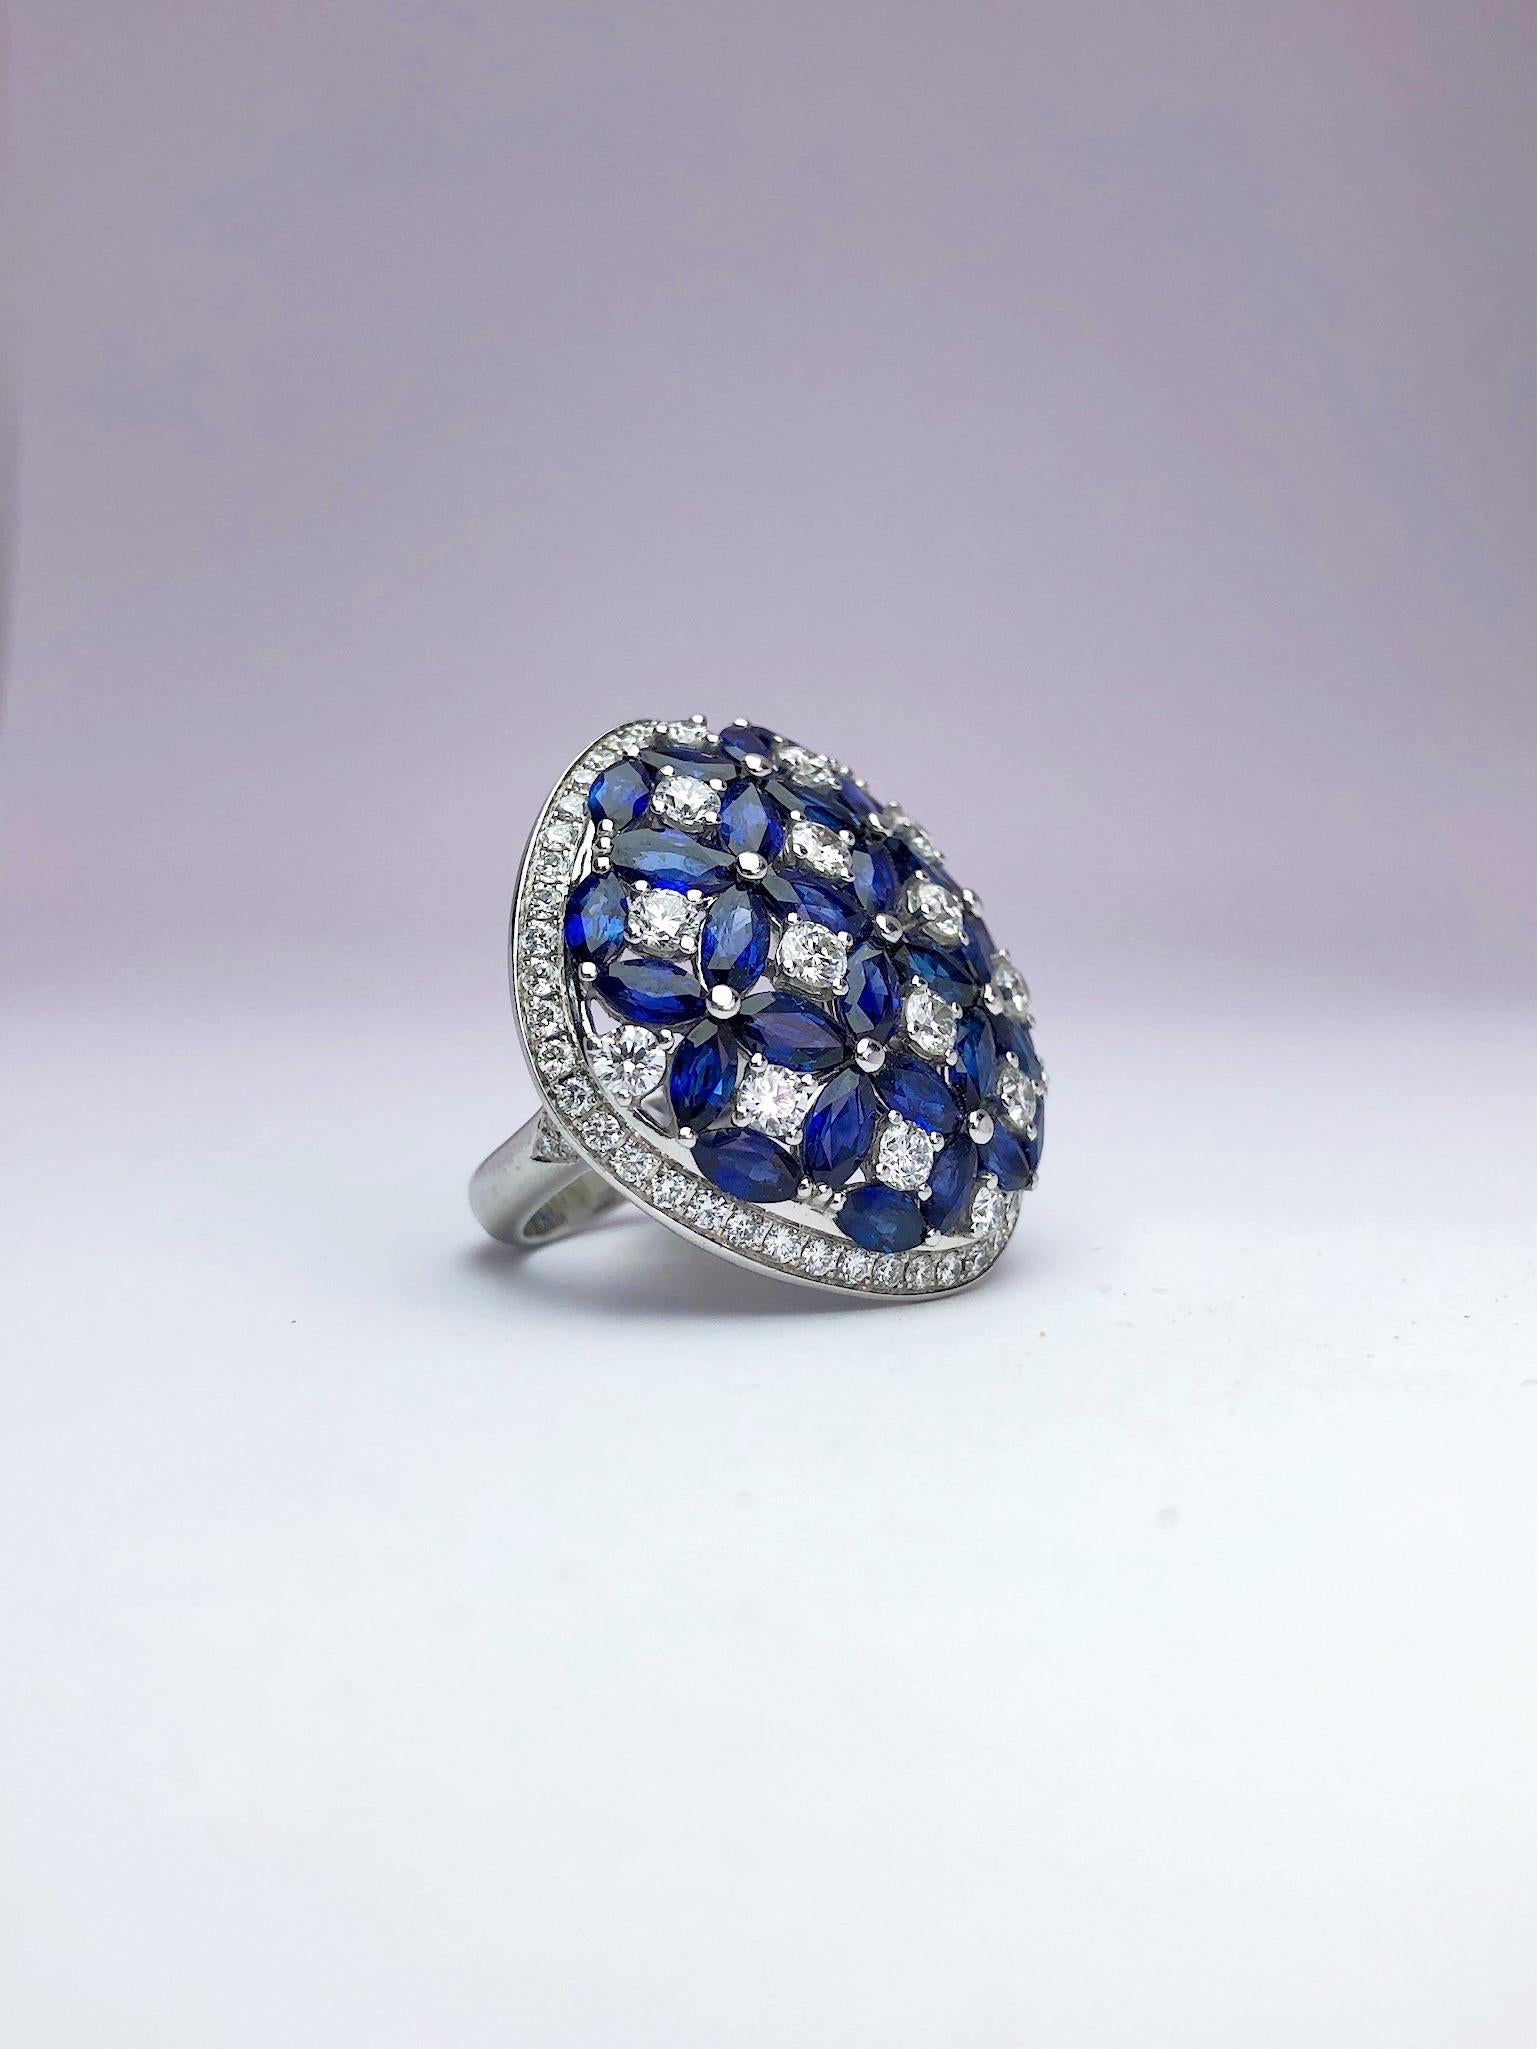 This 18 karat white gold ring is a large cushion shape. The center is uniquely set with blue sapphire marquise cut stones and round brilliant round diamonds. Together the sapphires and diamonds form flower like shapes. The border of the cushion